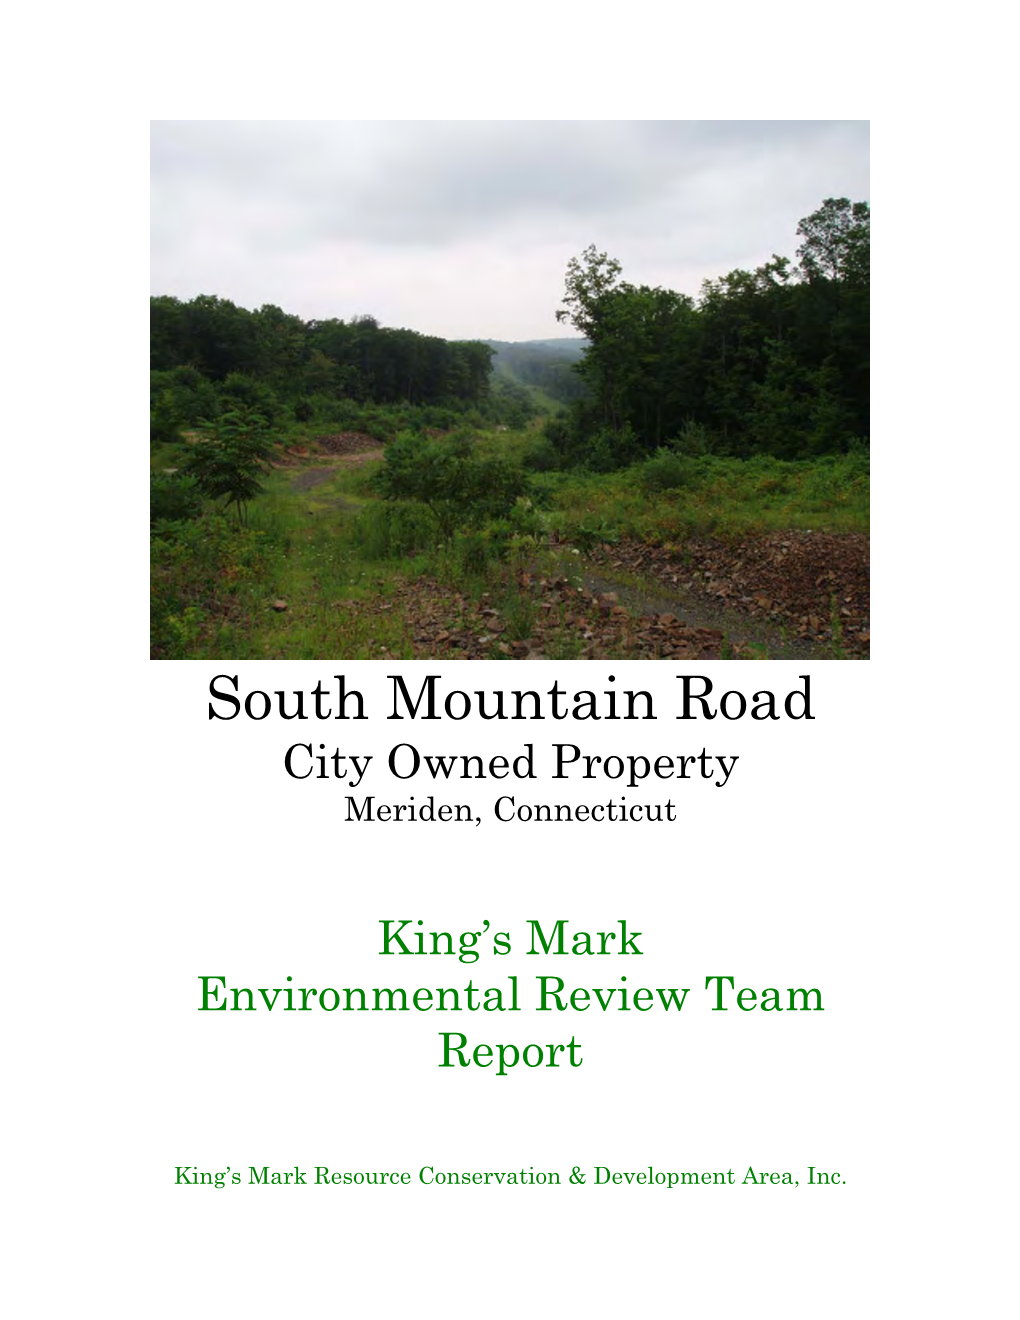 South Mountain Road City Owned Property Meriden, Connecticut